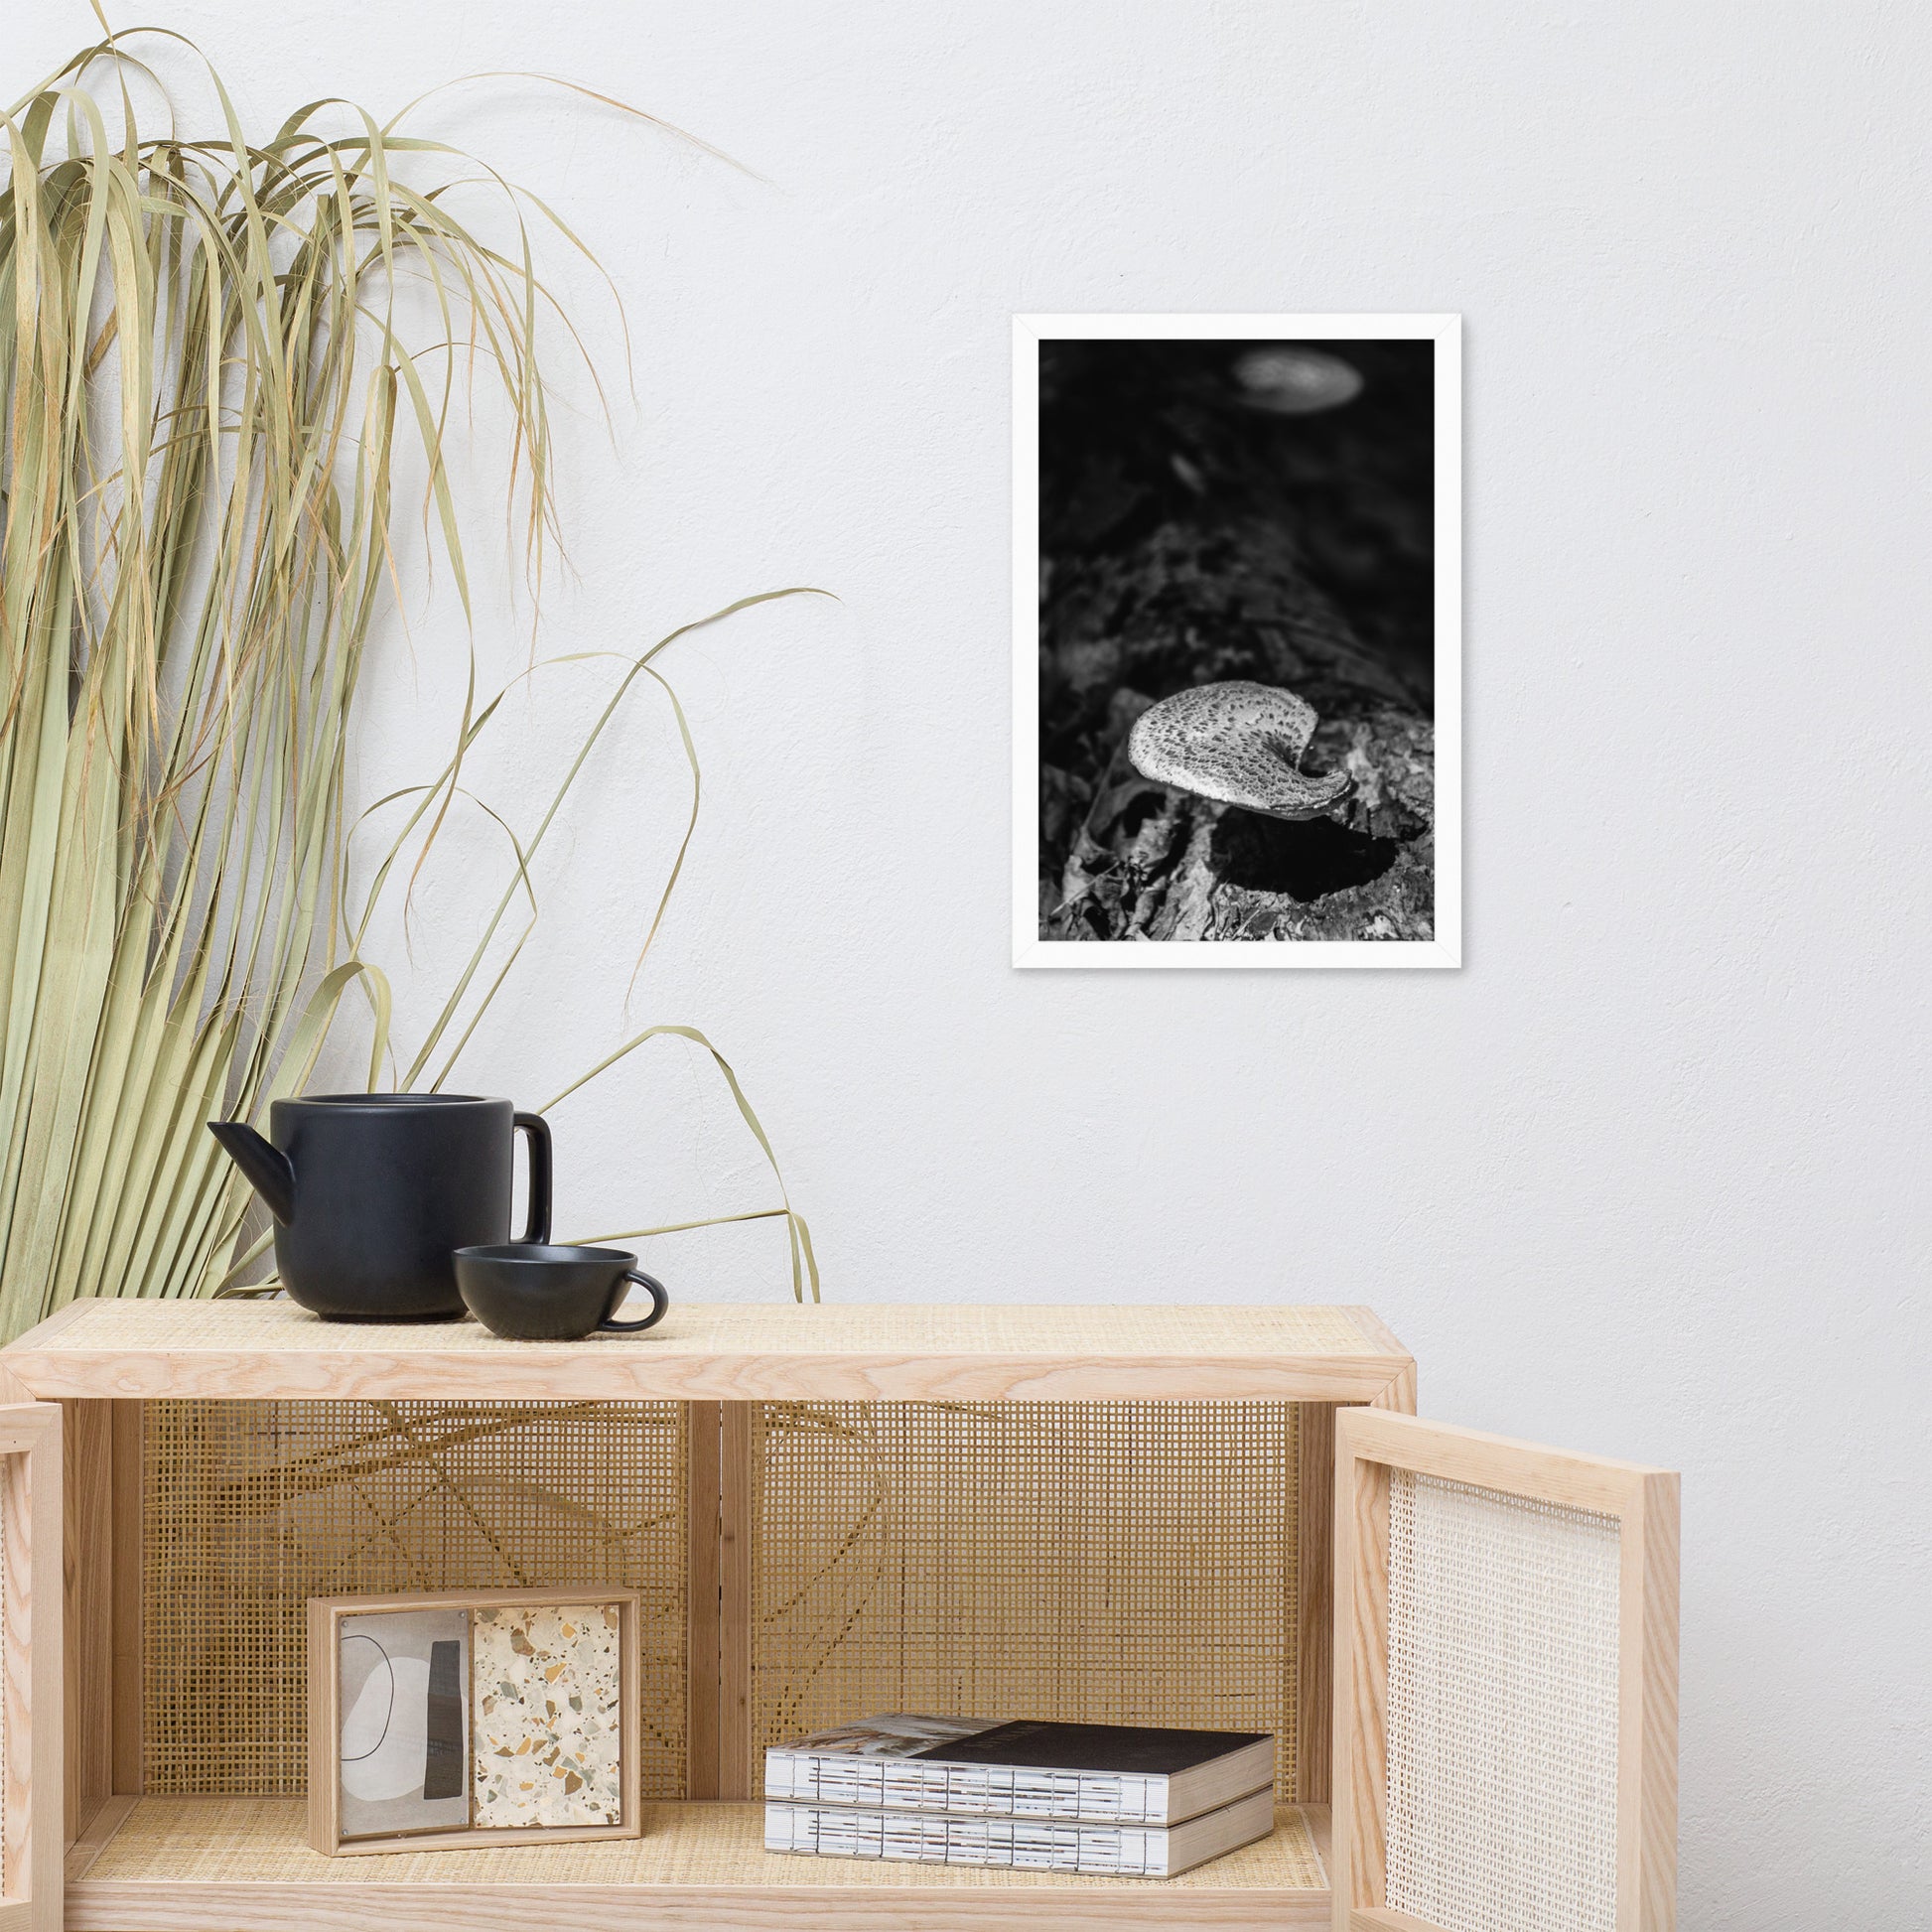 Neutral Botanical Prints: Mushroom on Log in Black & White Rustic / Country Style Nature Photo Framed Wall Art Print